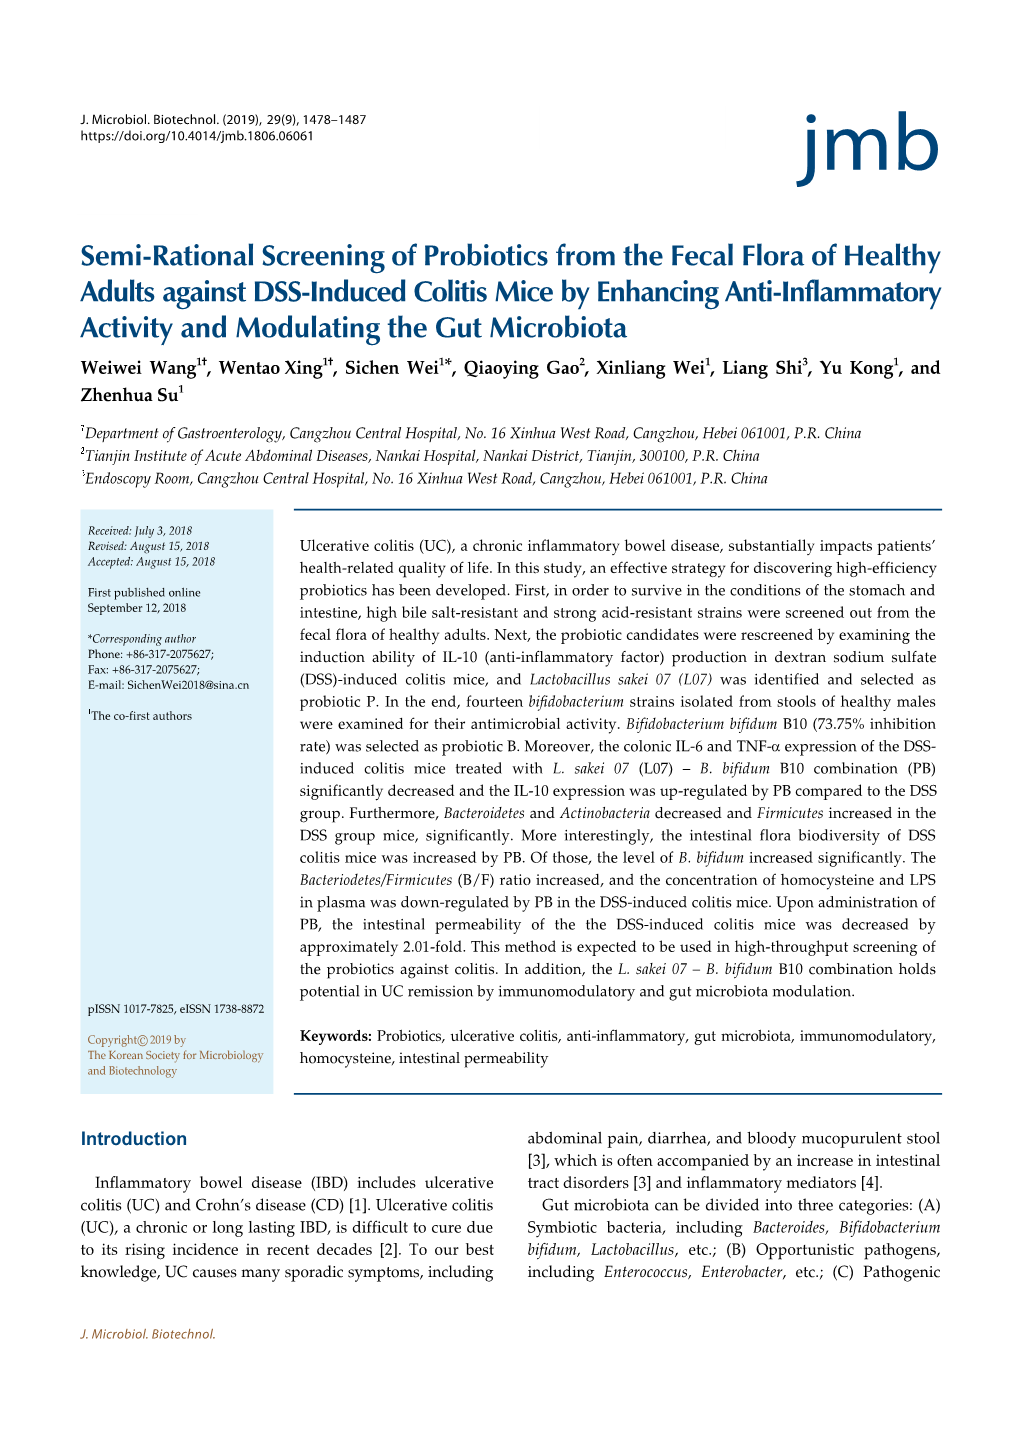 Semi-Rational Screening of Probiotics from the Fecal Flora of Healthy